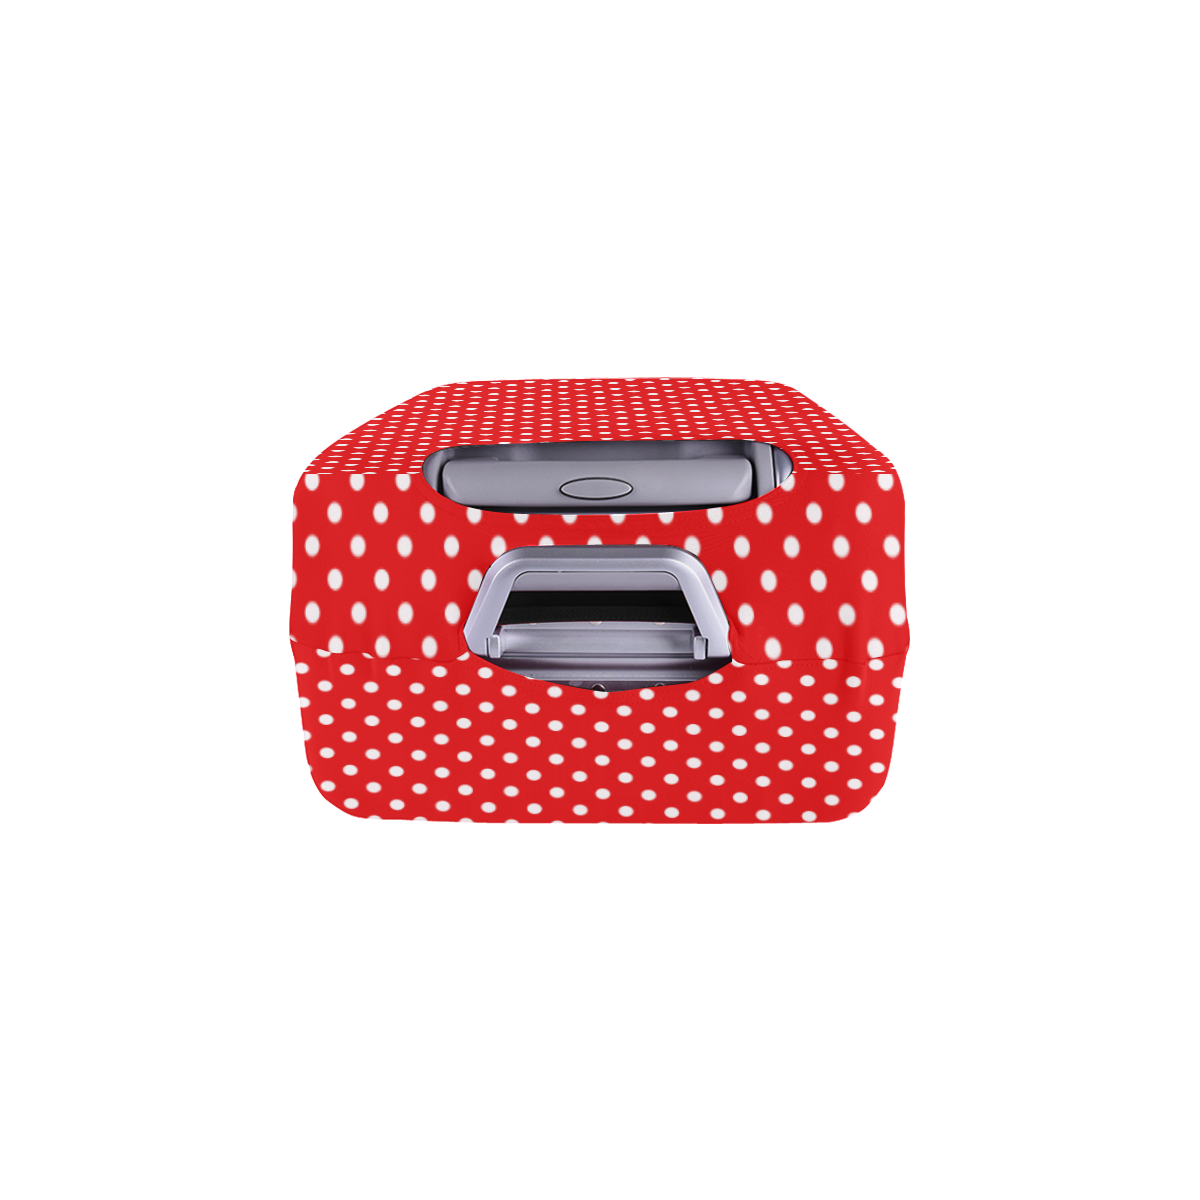 Red polka dots Luggage Cover/Medium 22"-25"